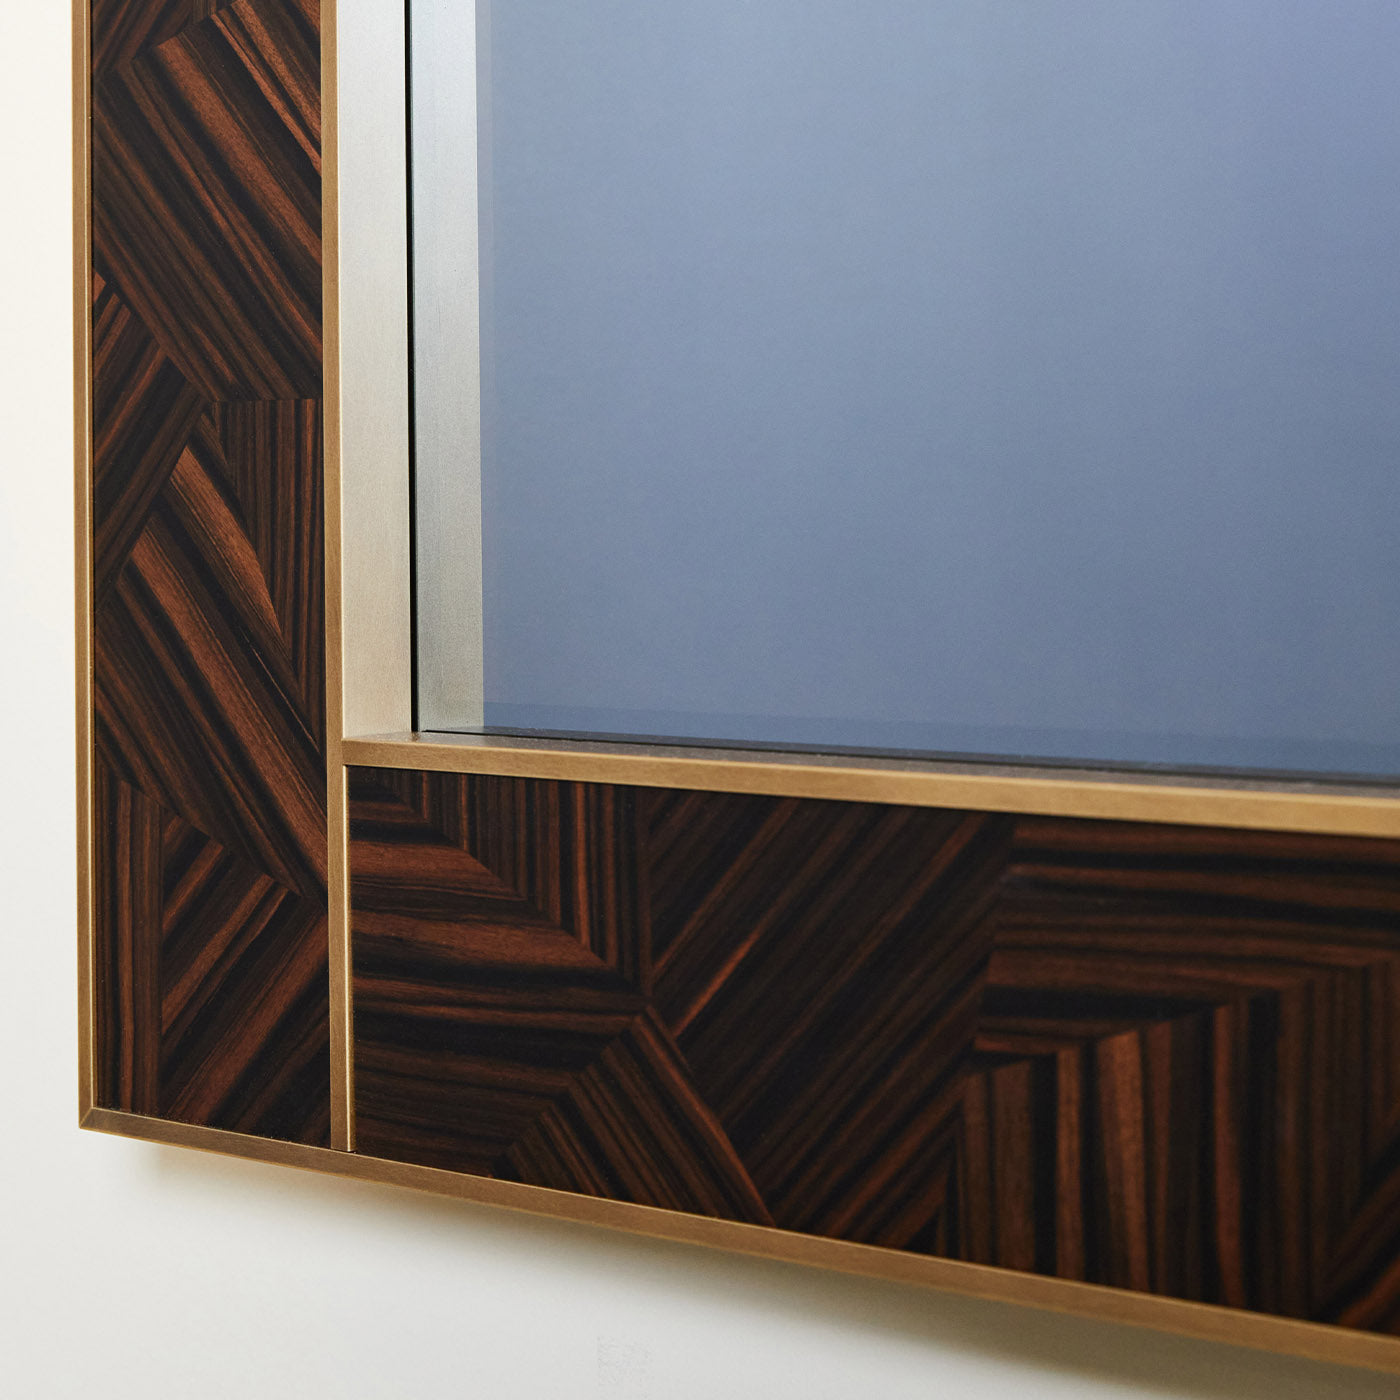 Inda Wall Mirror with Integrated 43" TV by Alfredo Colombo - Alternative view 3